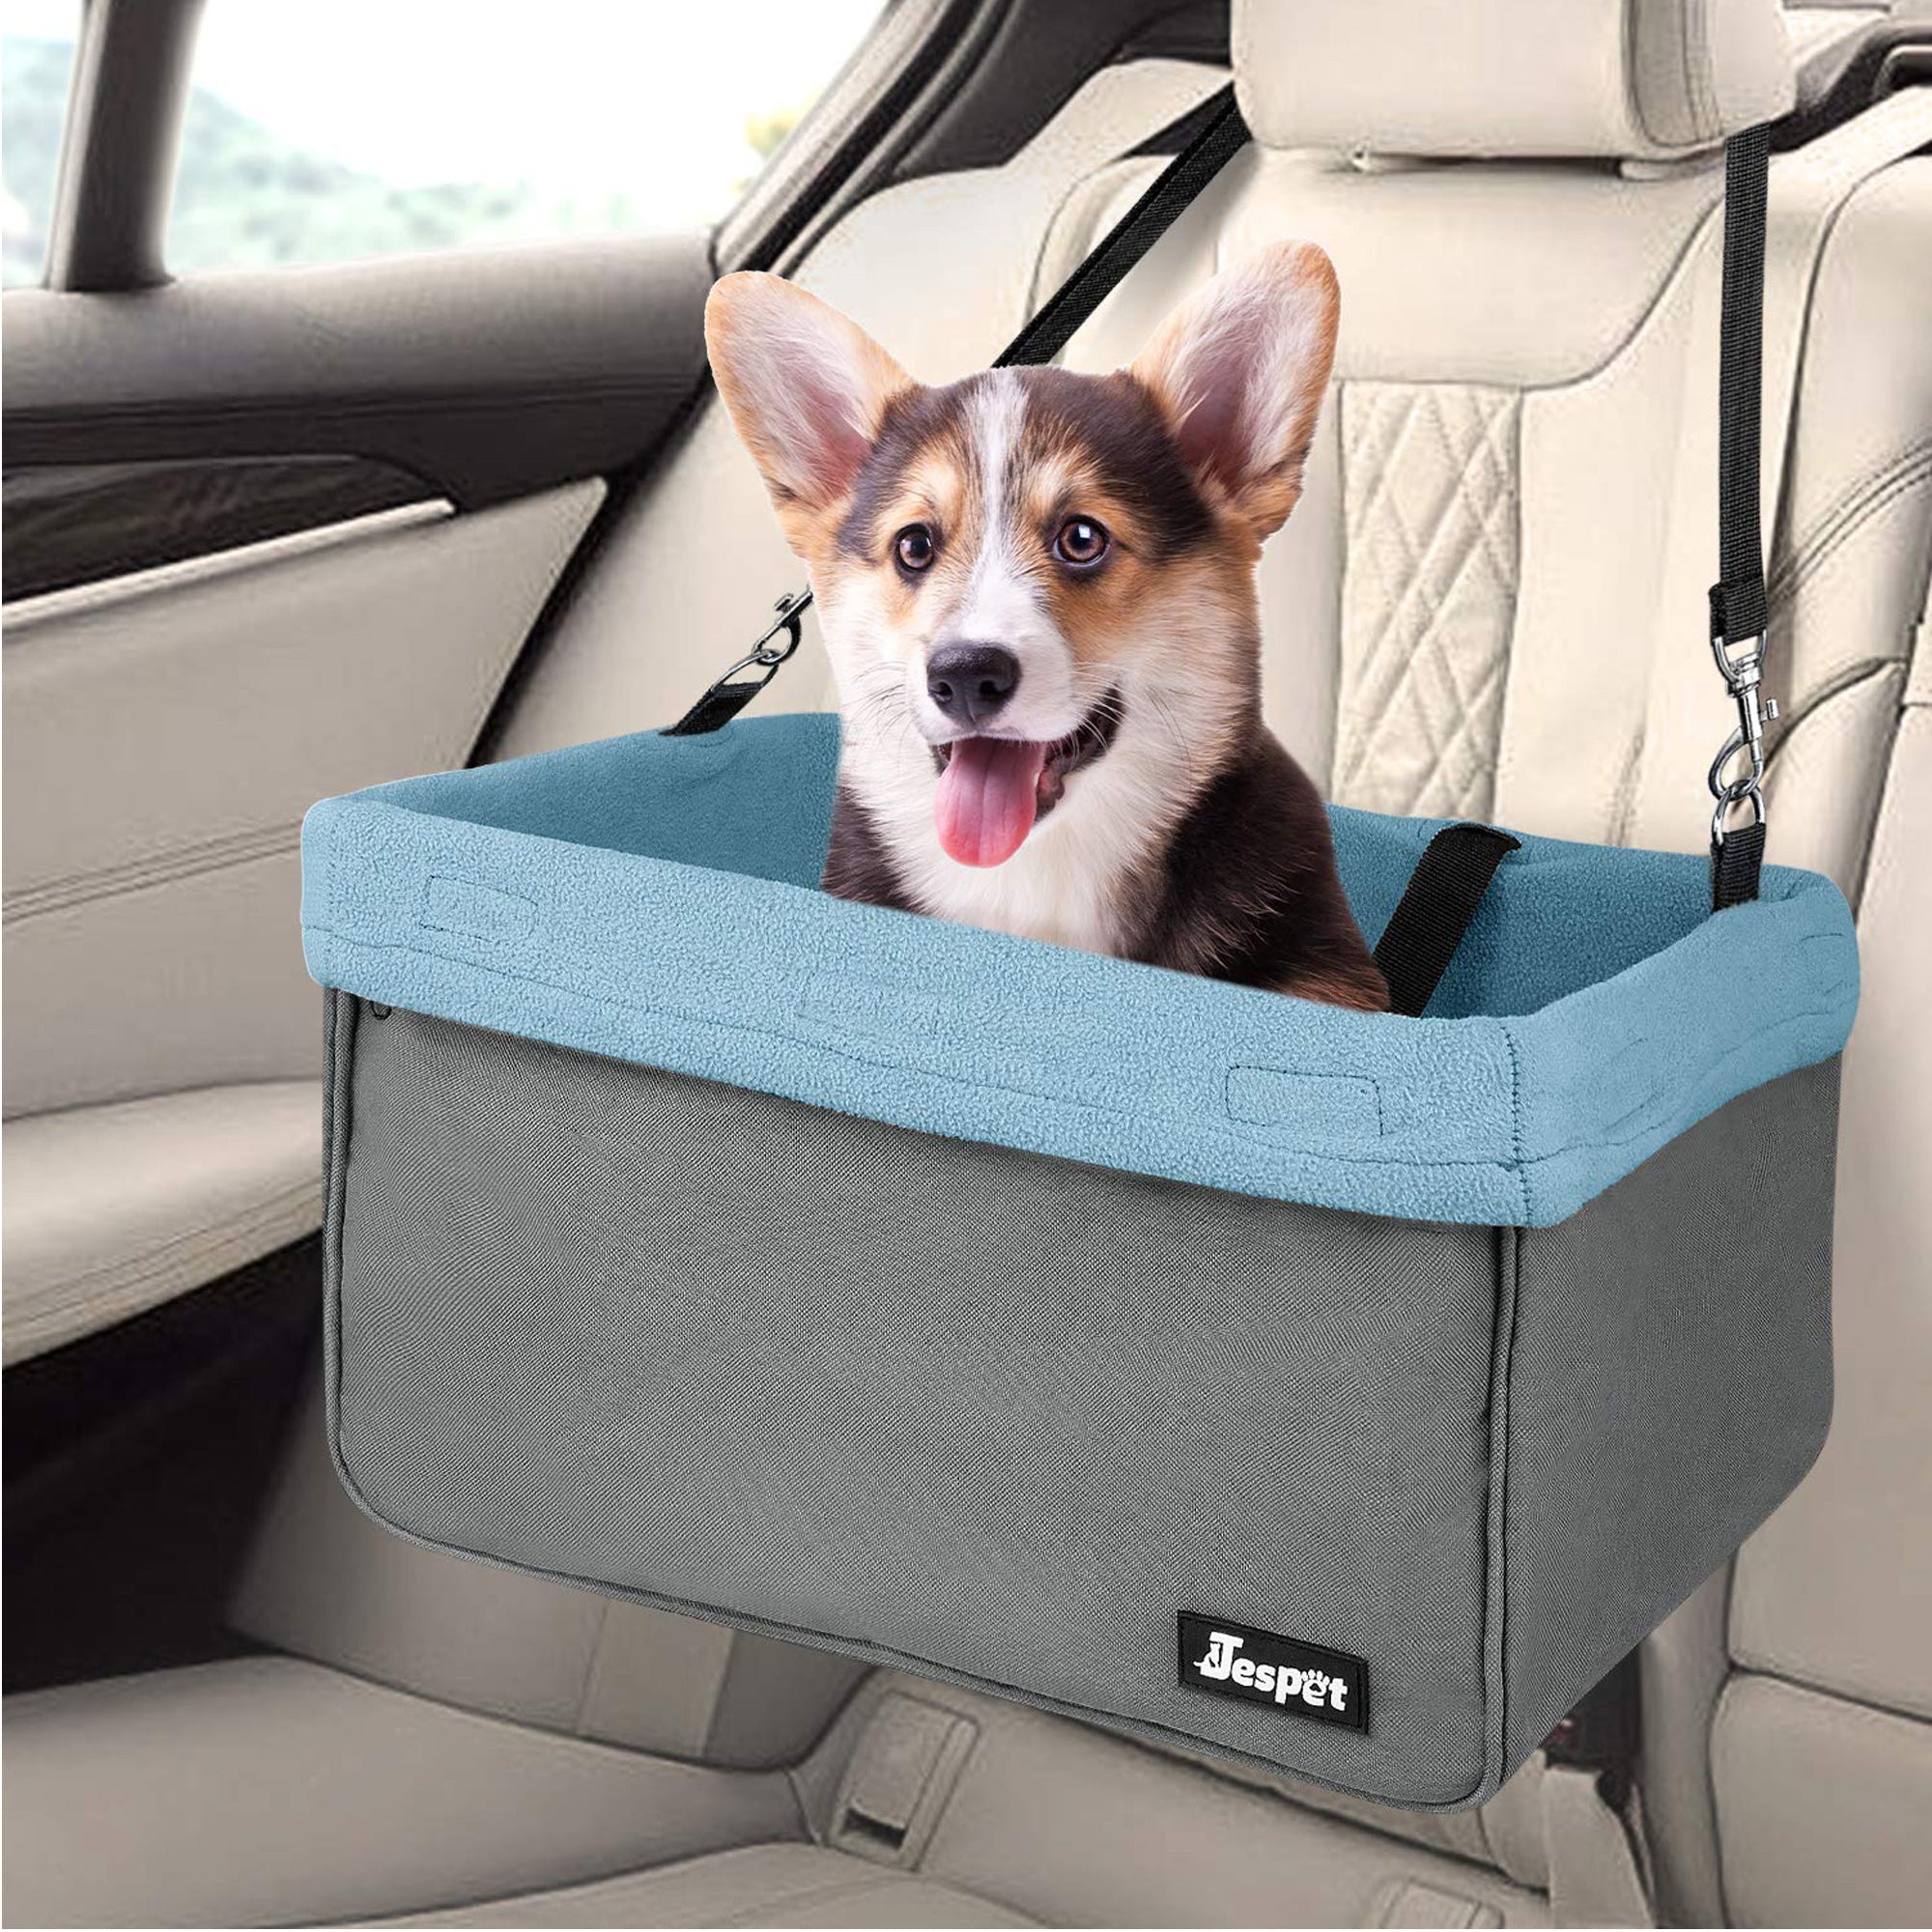 GOOPAWS Portable Pet Safety Booster Dog Car Seat with Seat Belt, Gray